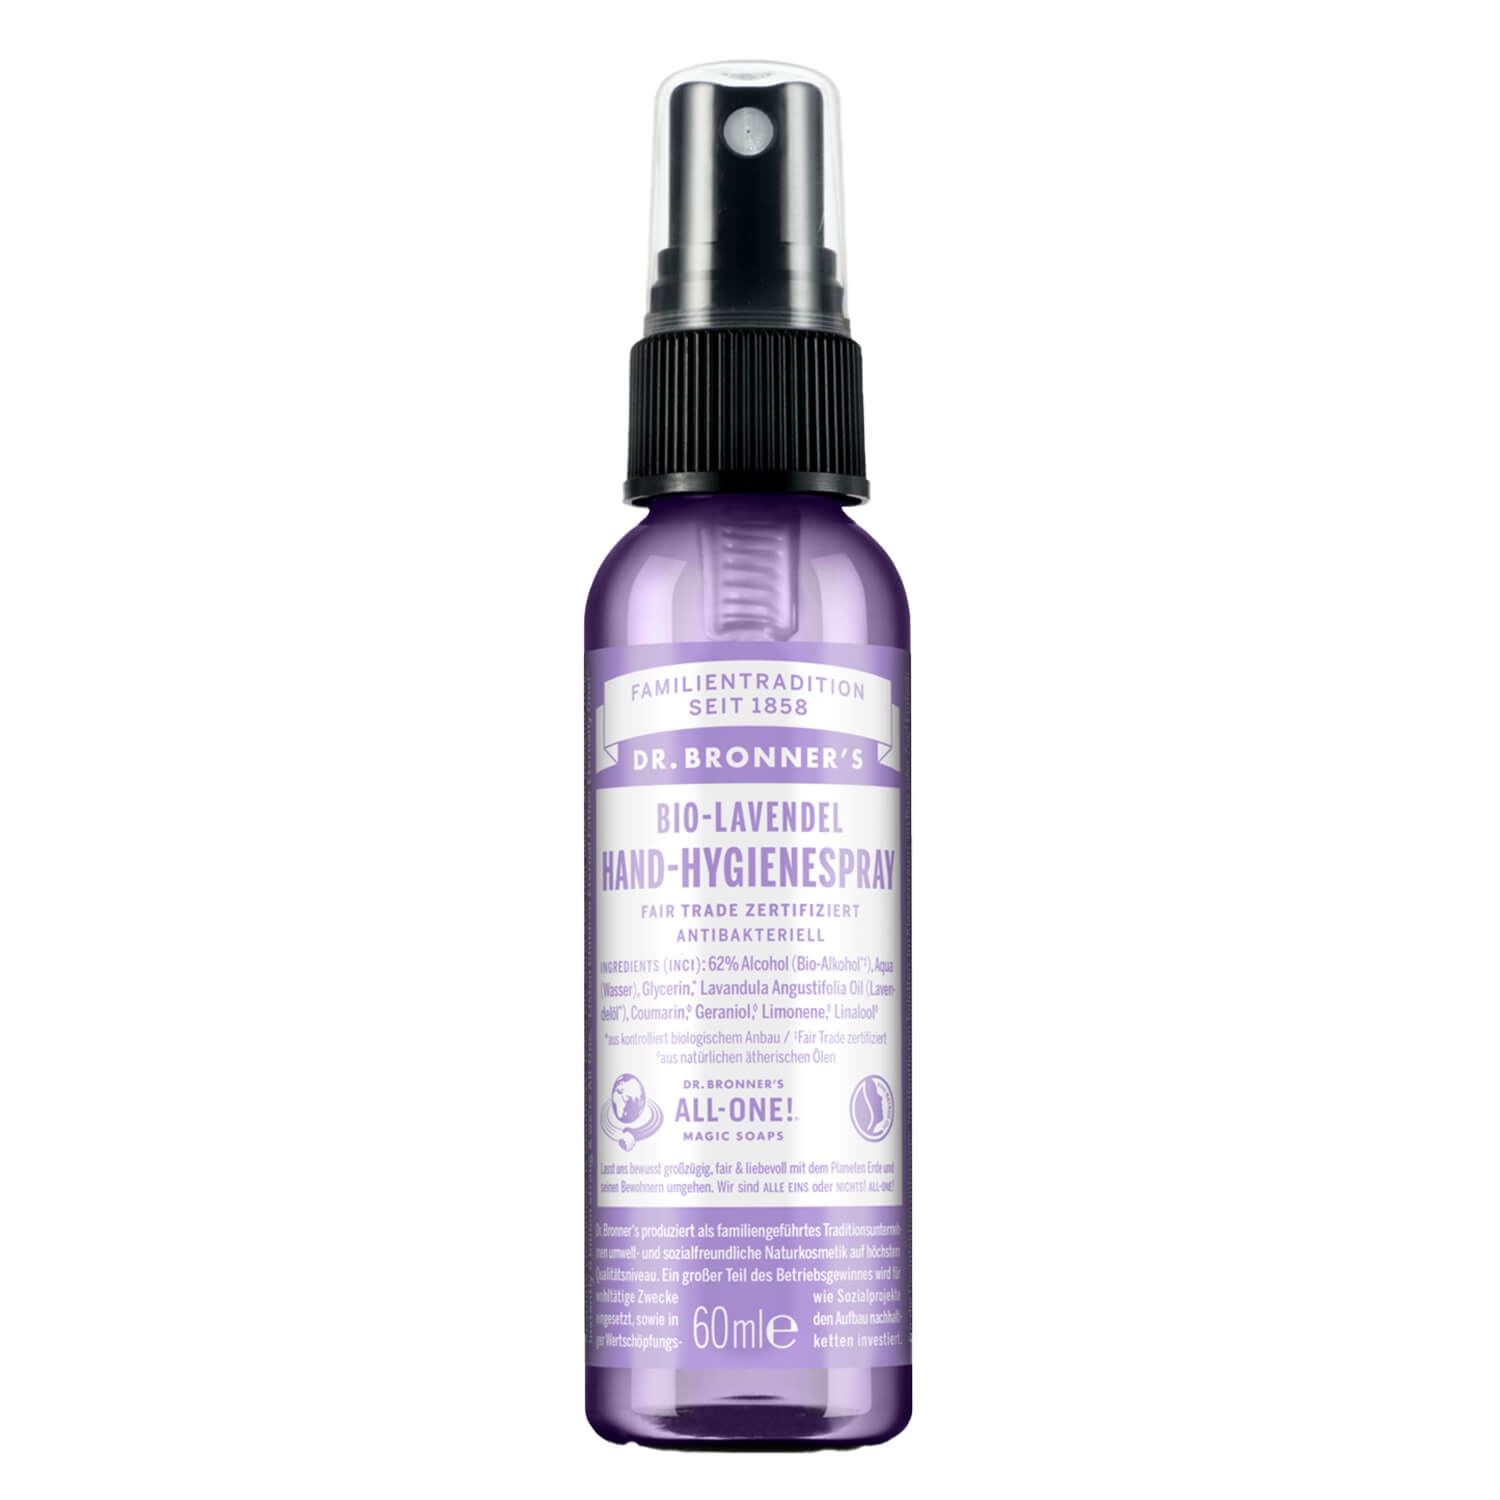 Product image from DR. BRONNER'S - Hygienespray Lavendel